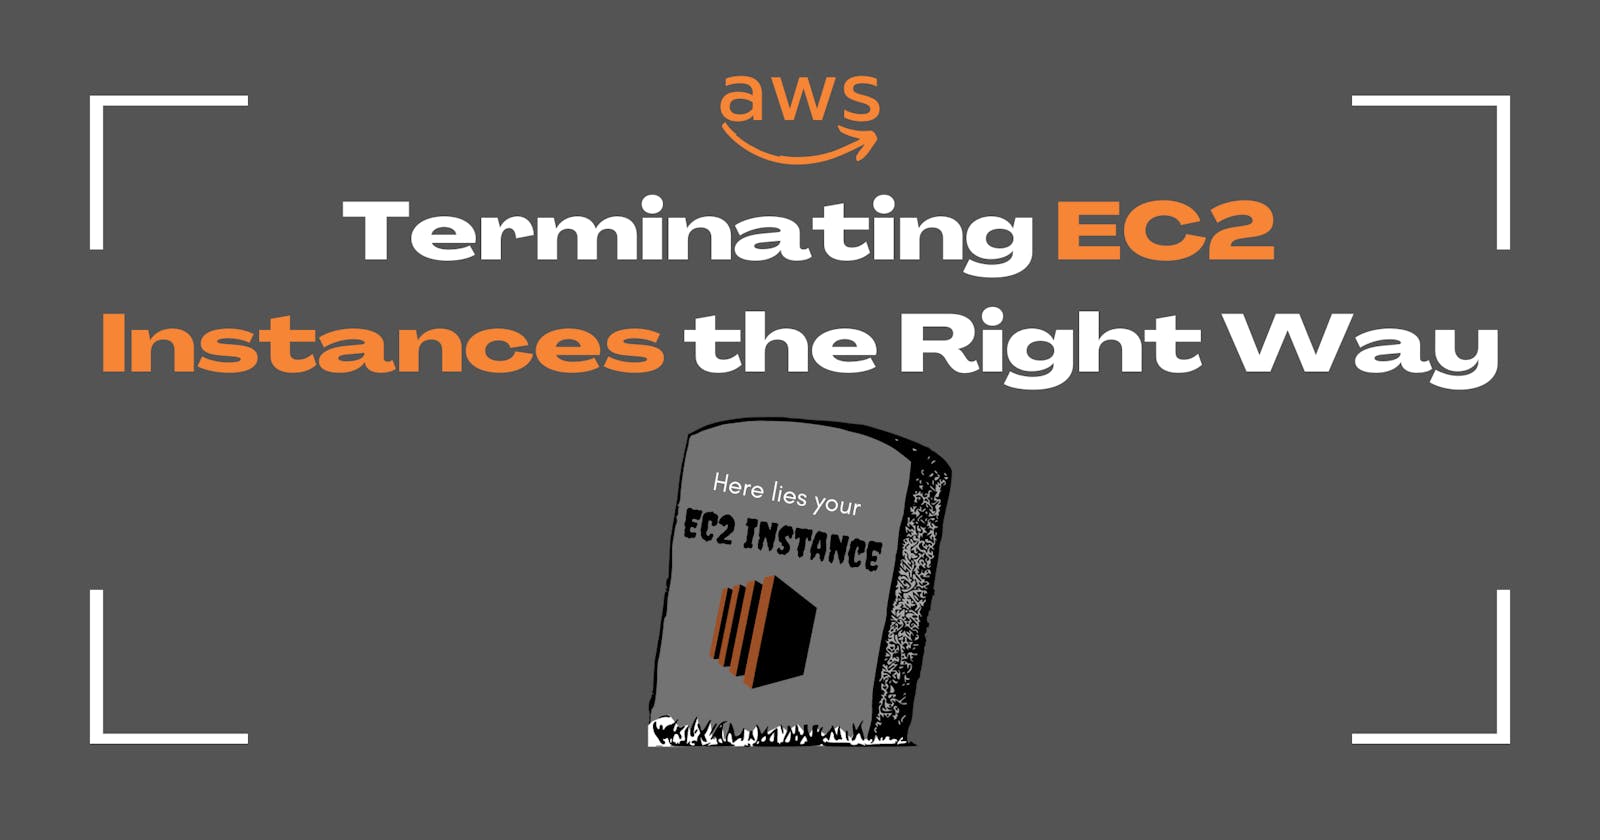 Terminating EC2 Instances the Right Way